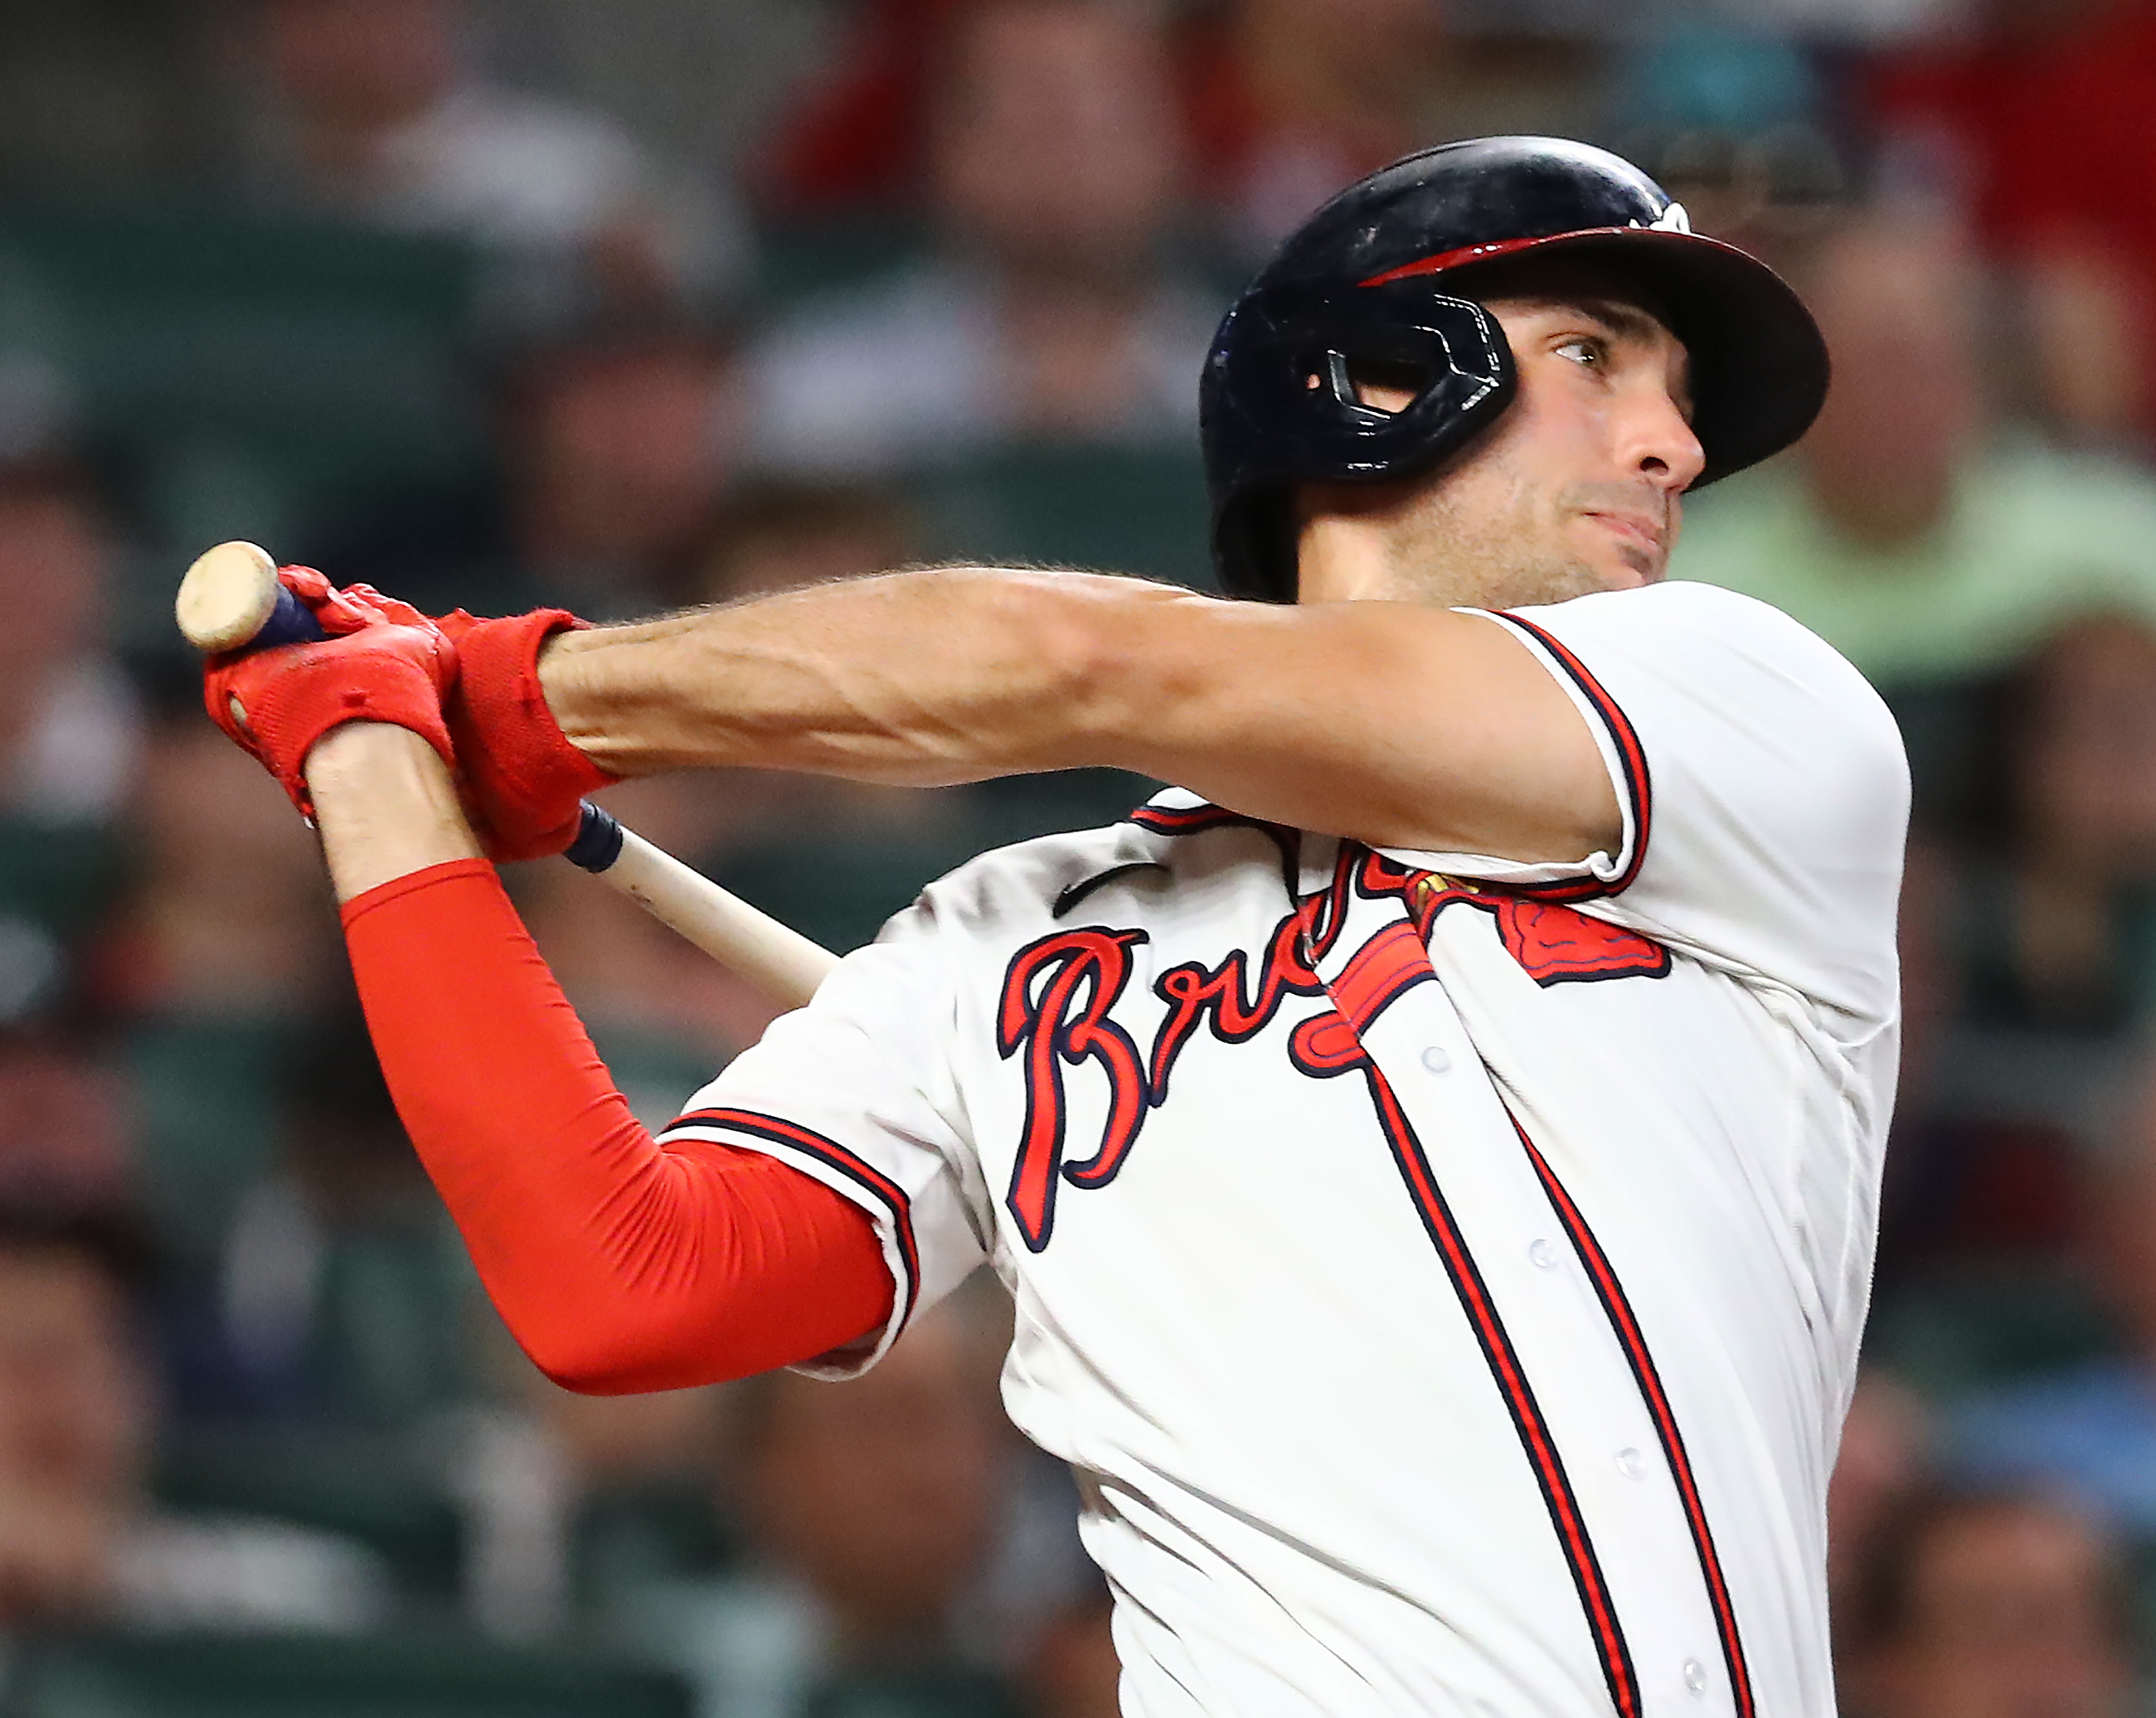 Matt Olson: Austin Riley is one of the most underrated players